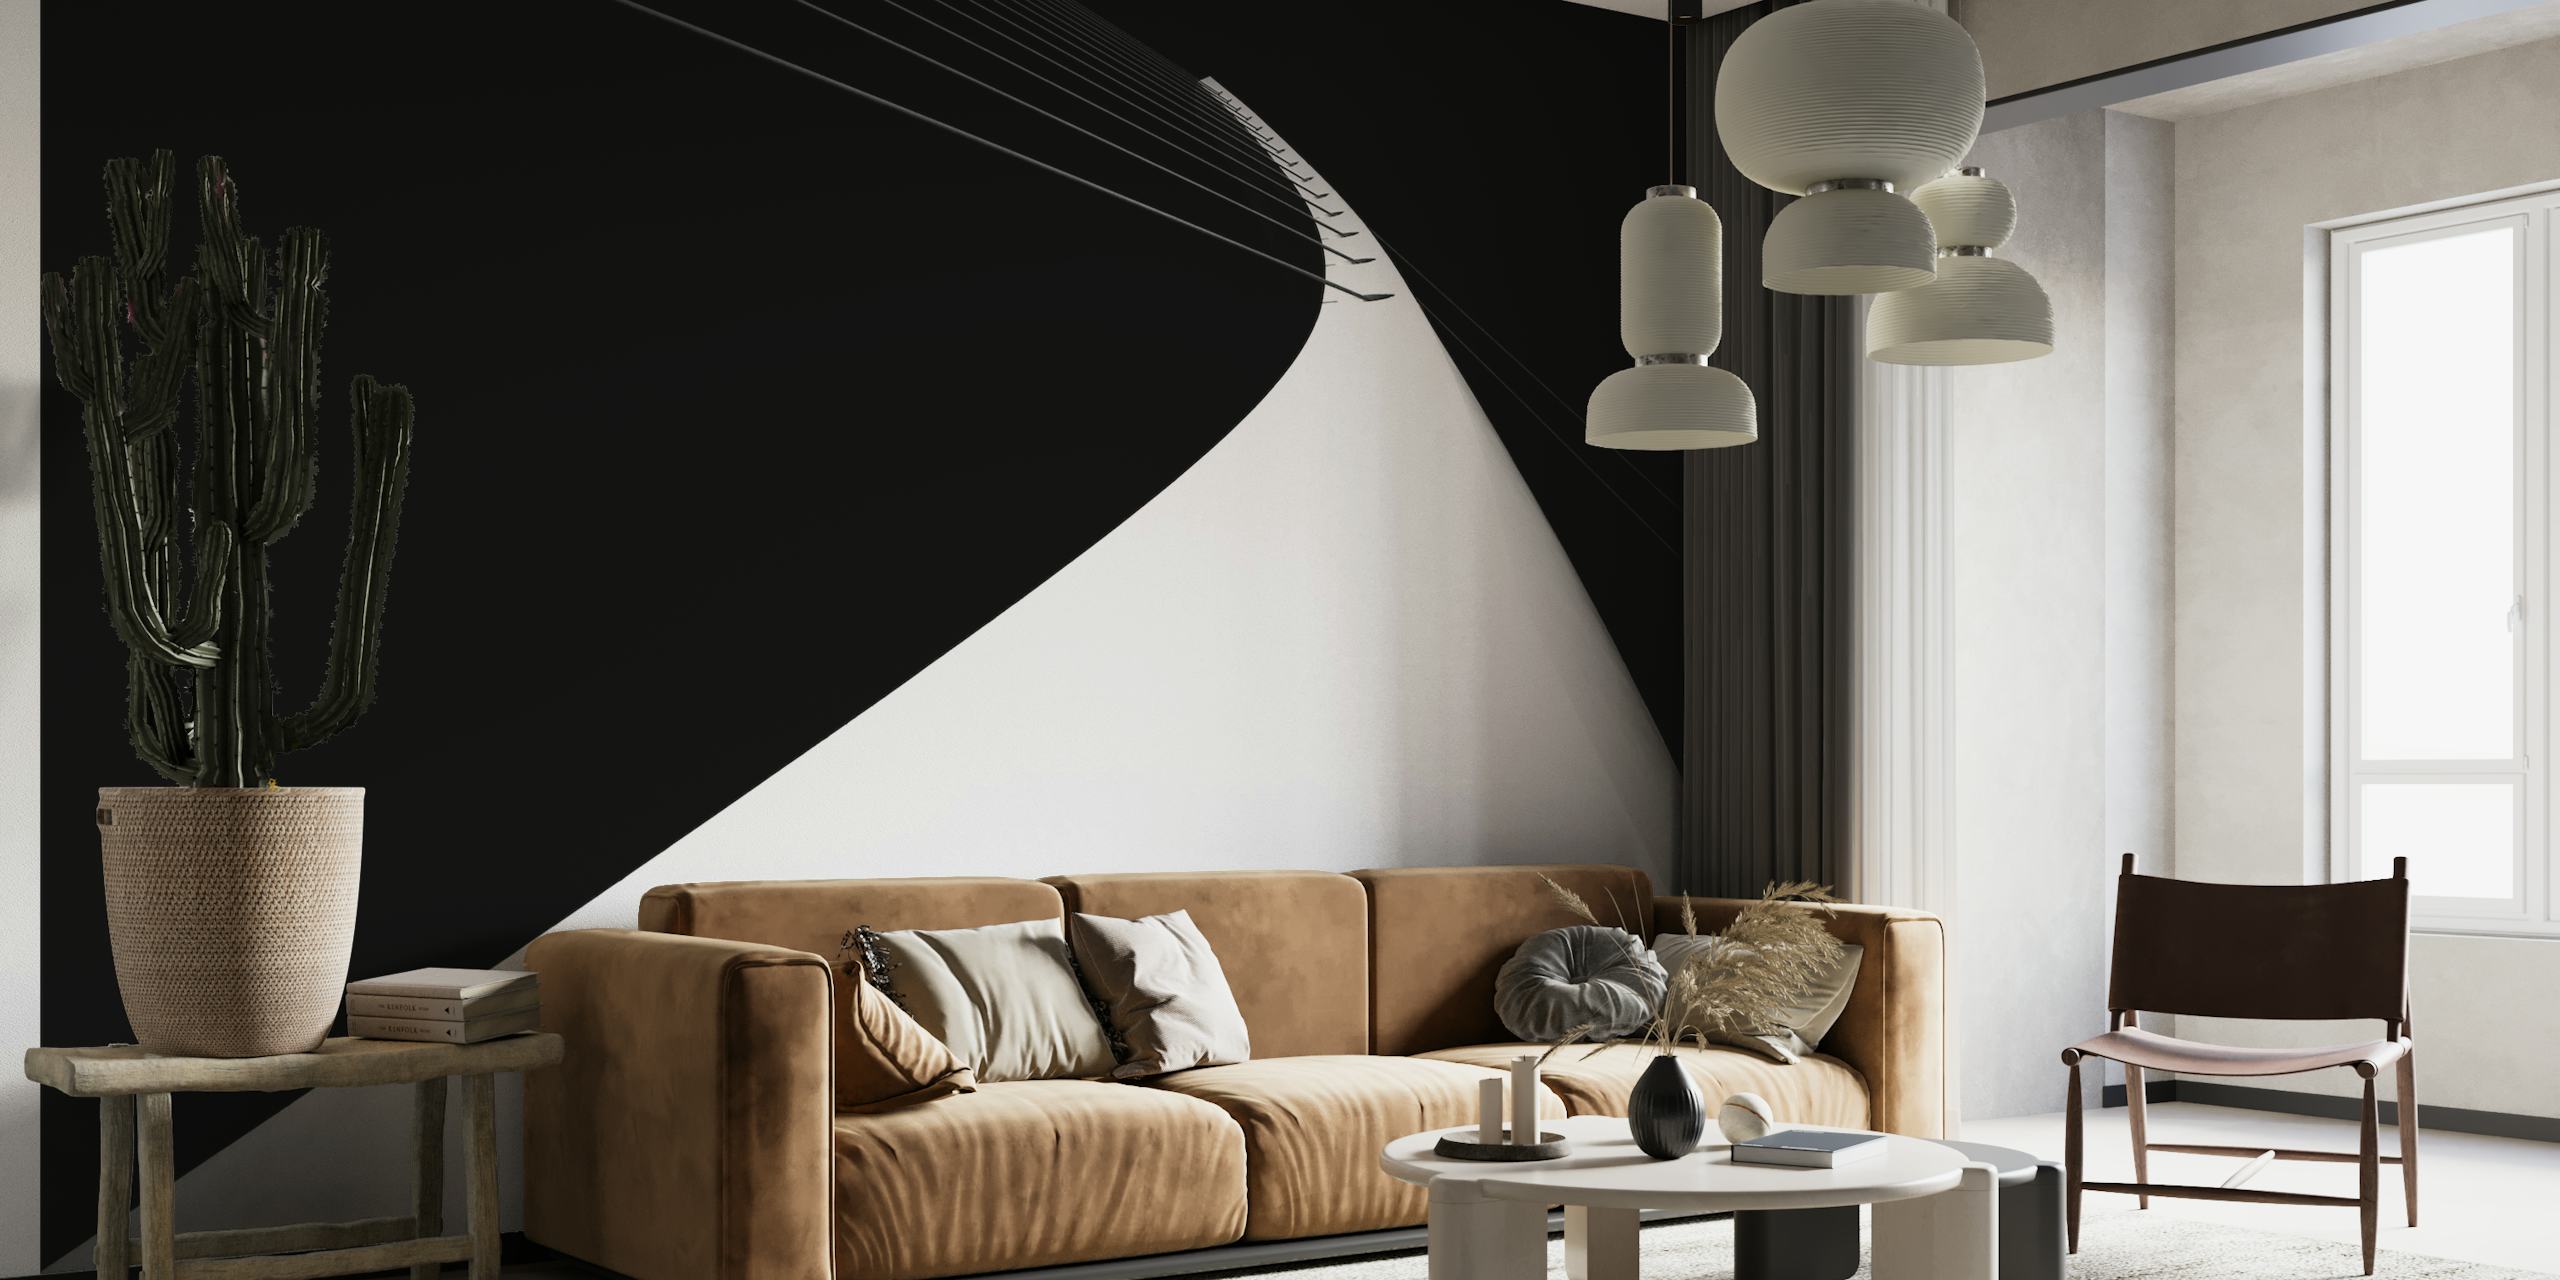 Black and white wall mural depicting a minimalist arch reaching towards a dark sky